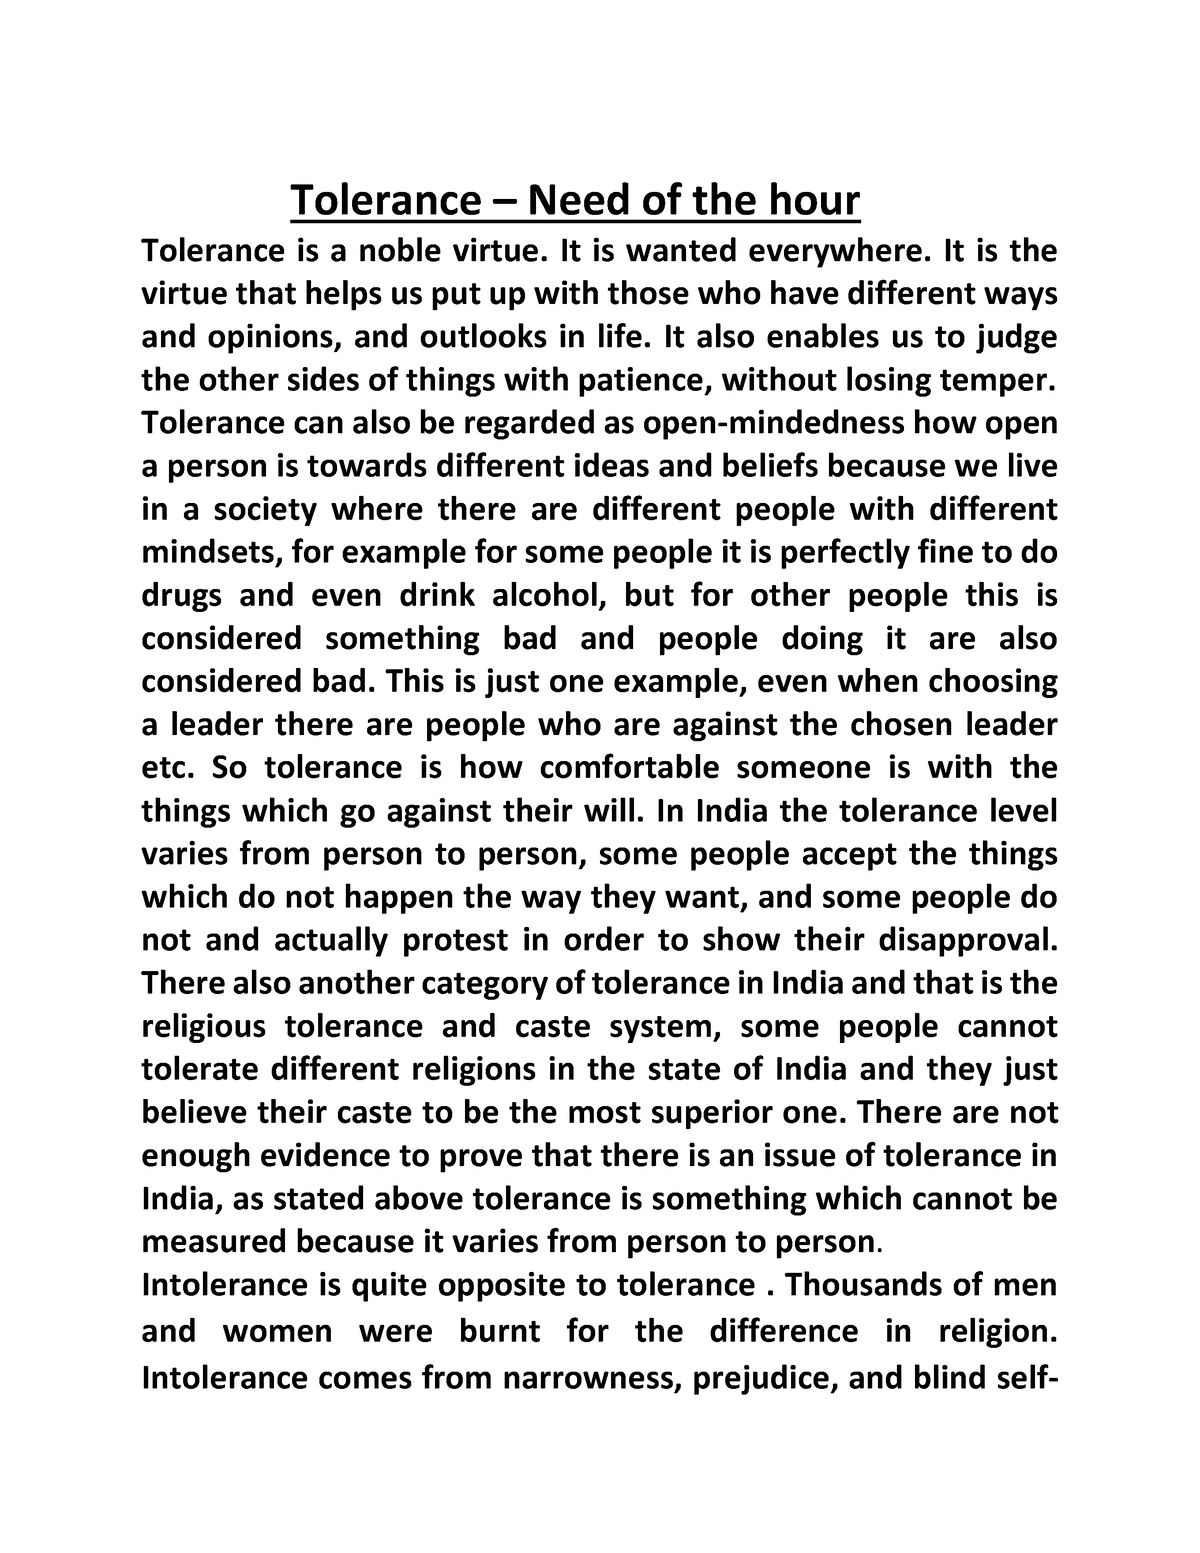 essay on tolerance the need of hour